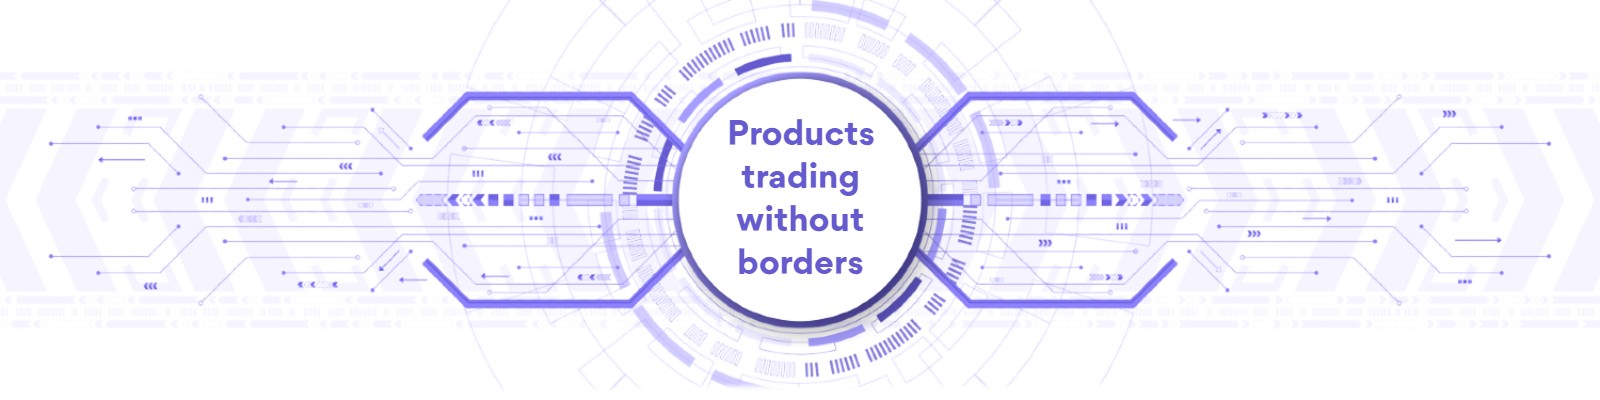 Products trading without borders